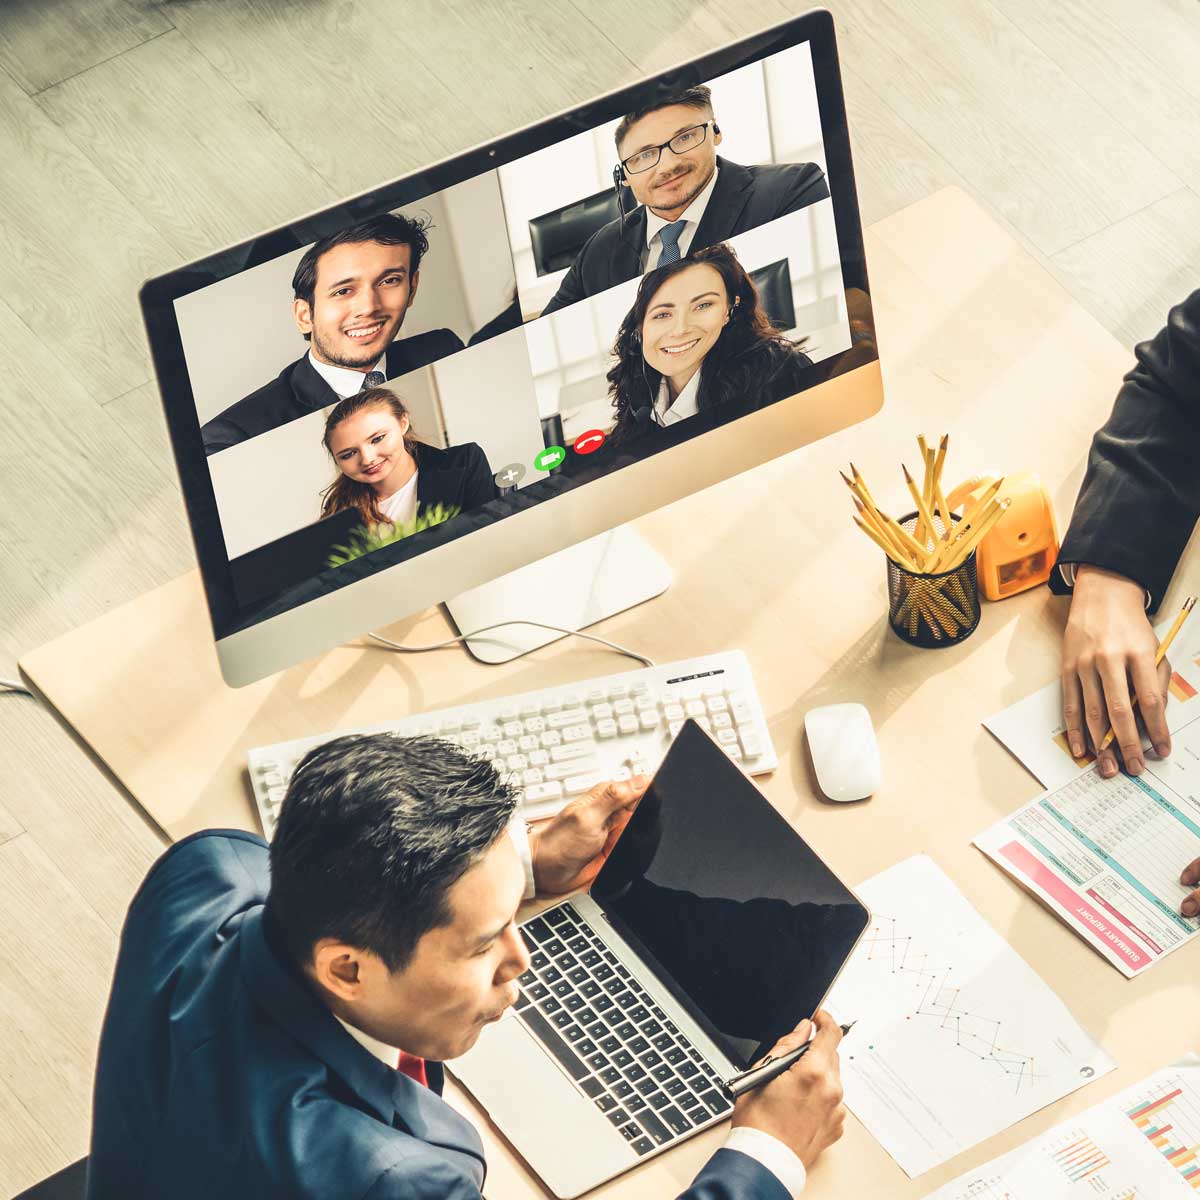 Video call group business people meeting on virtual workplace or remote office. Telework conference call using smart video technology to communicate colleague in professional not-for-profit organization